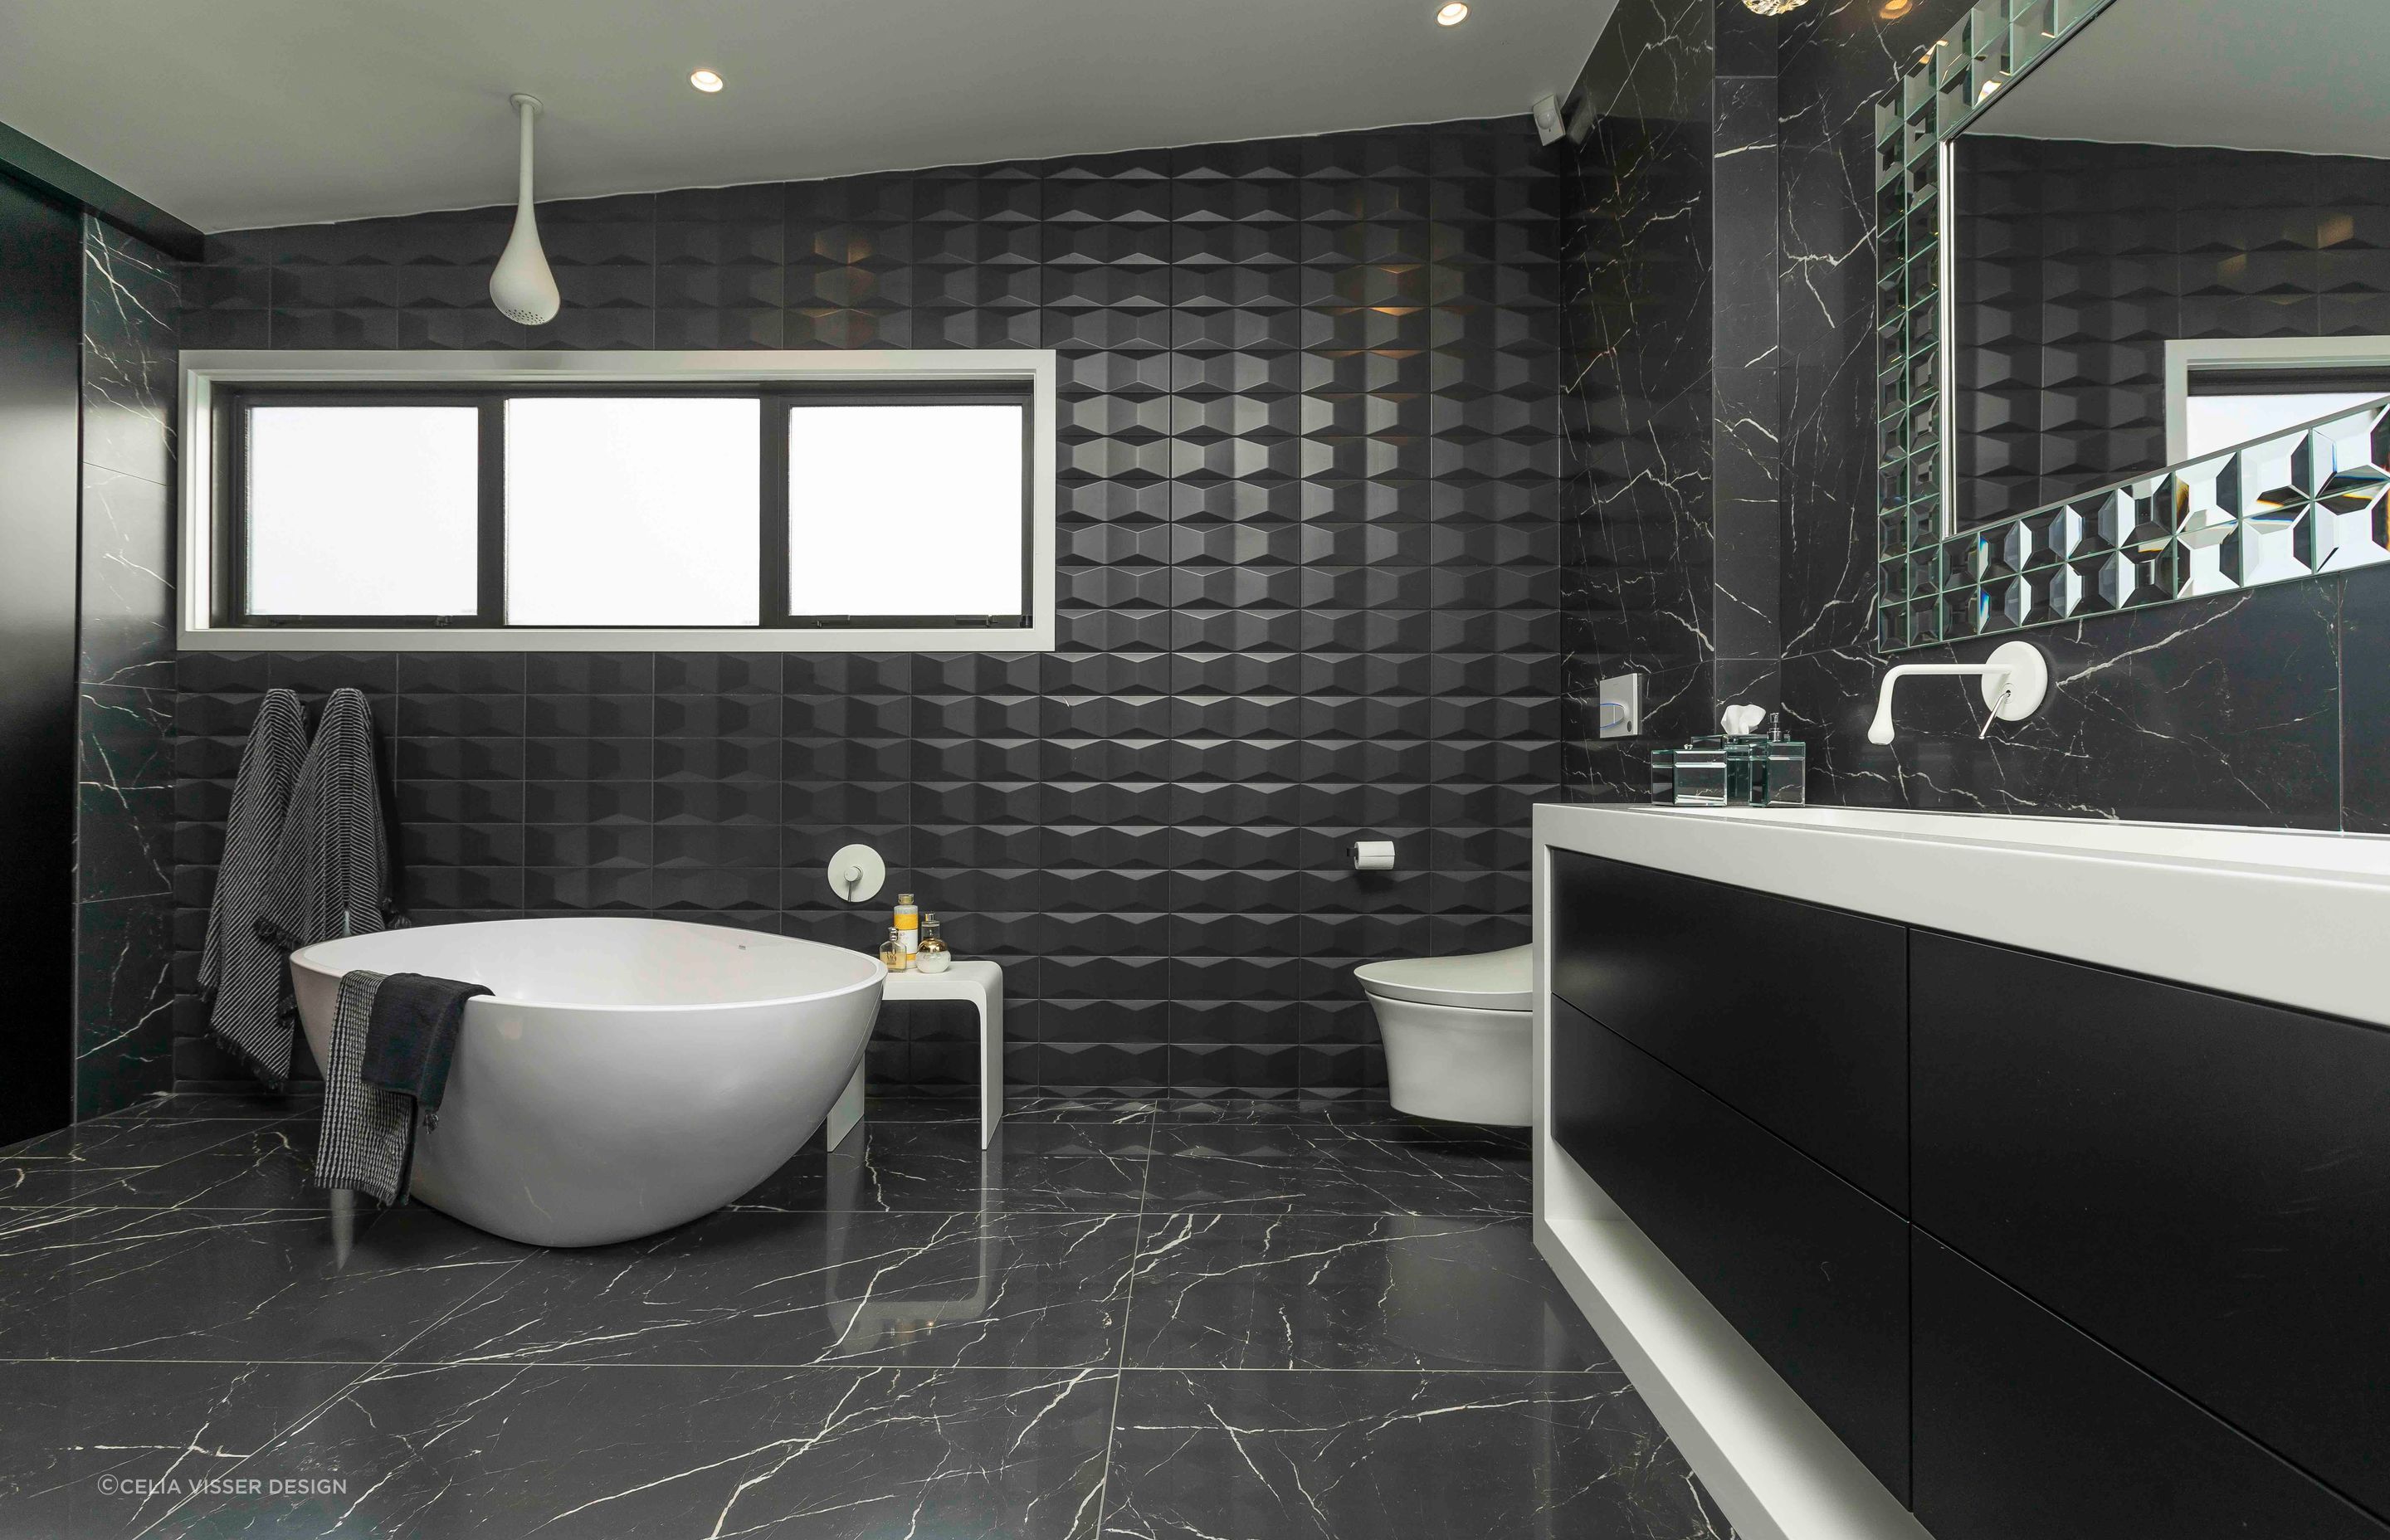 This master ensuite in Wiri personifies texture and depth with its use of textured bathtub surround tiles.